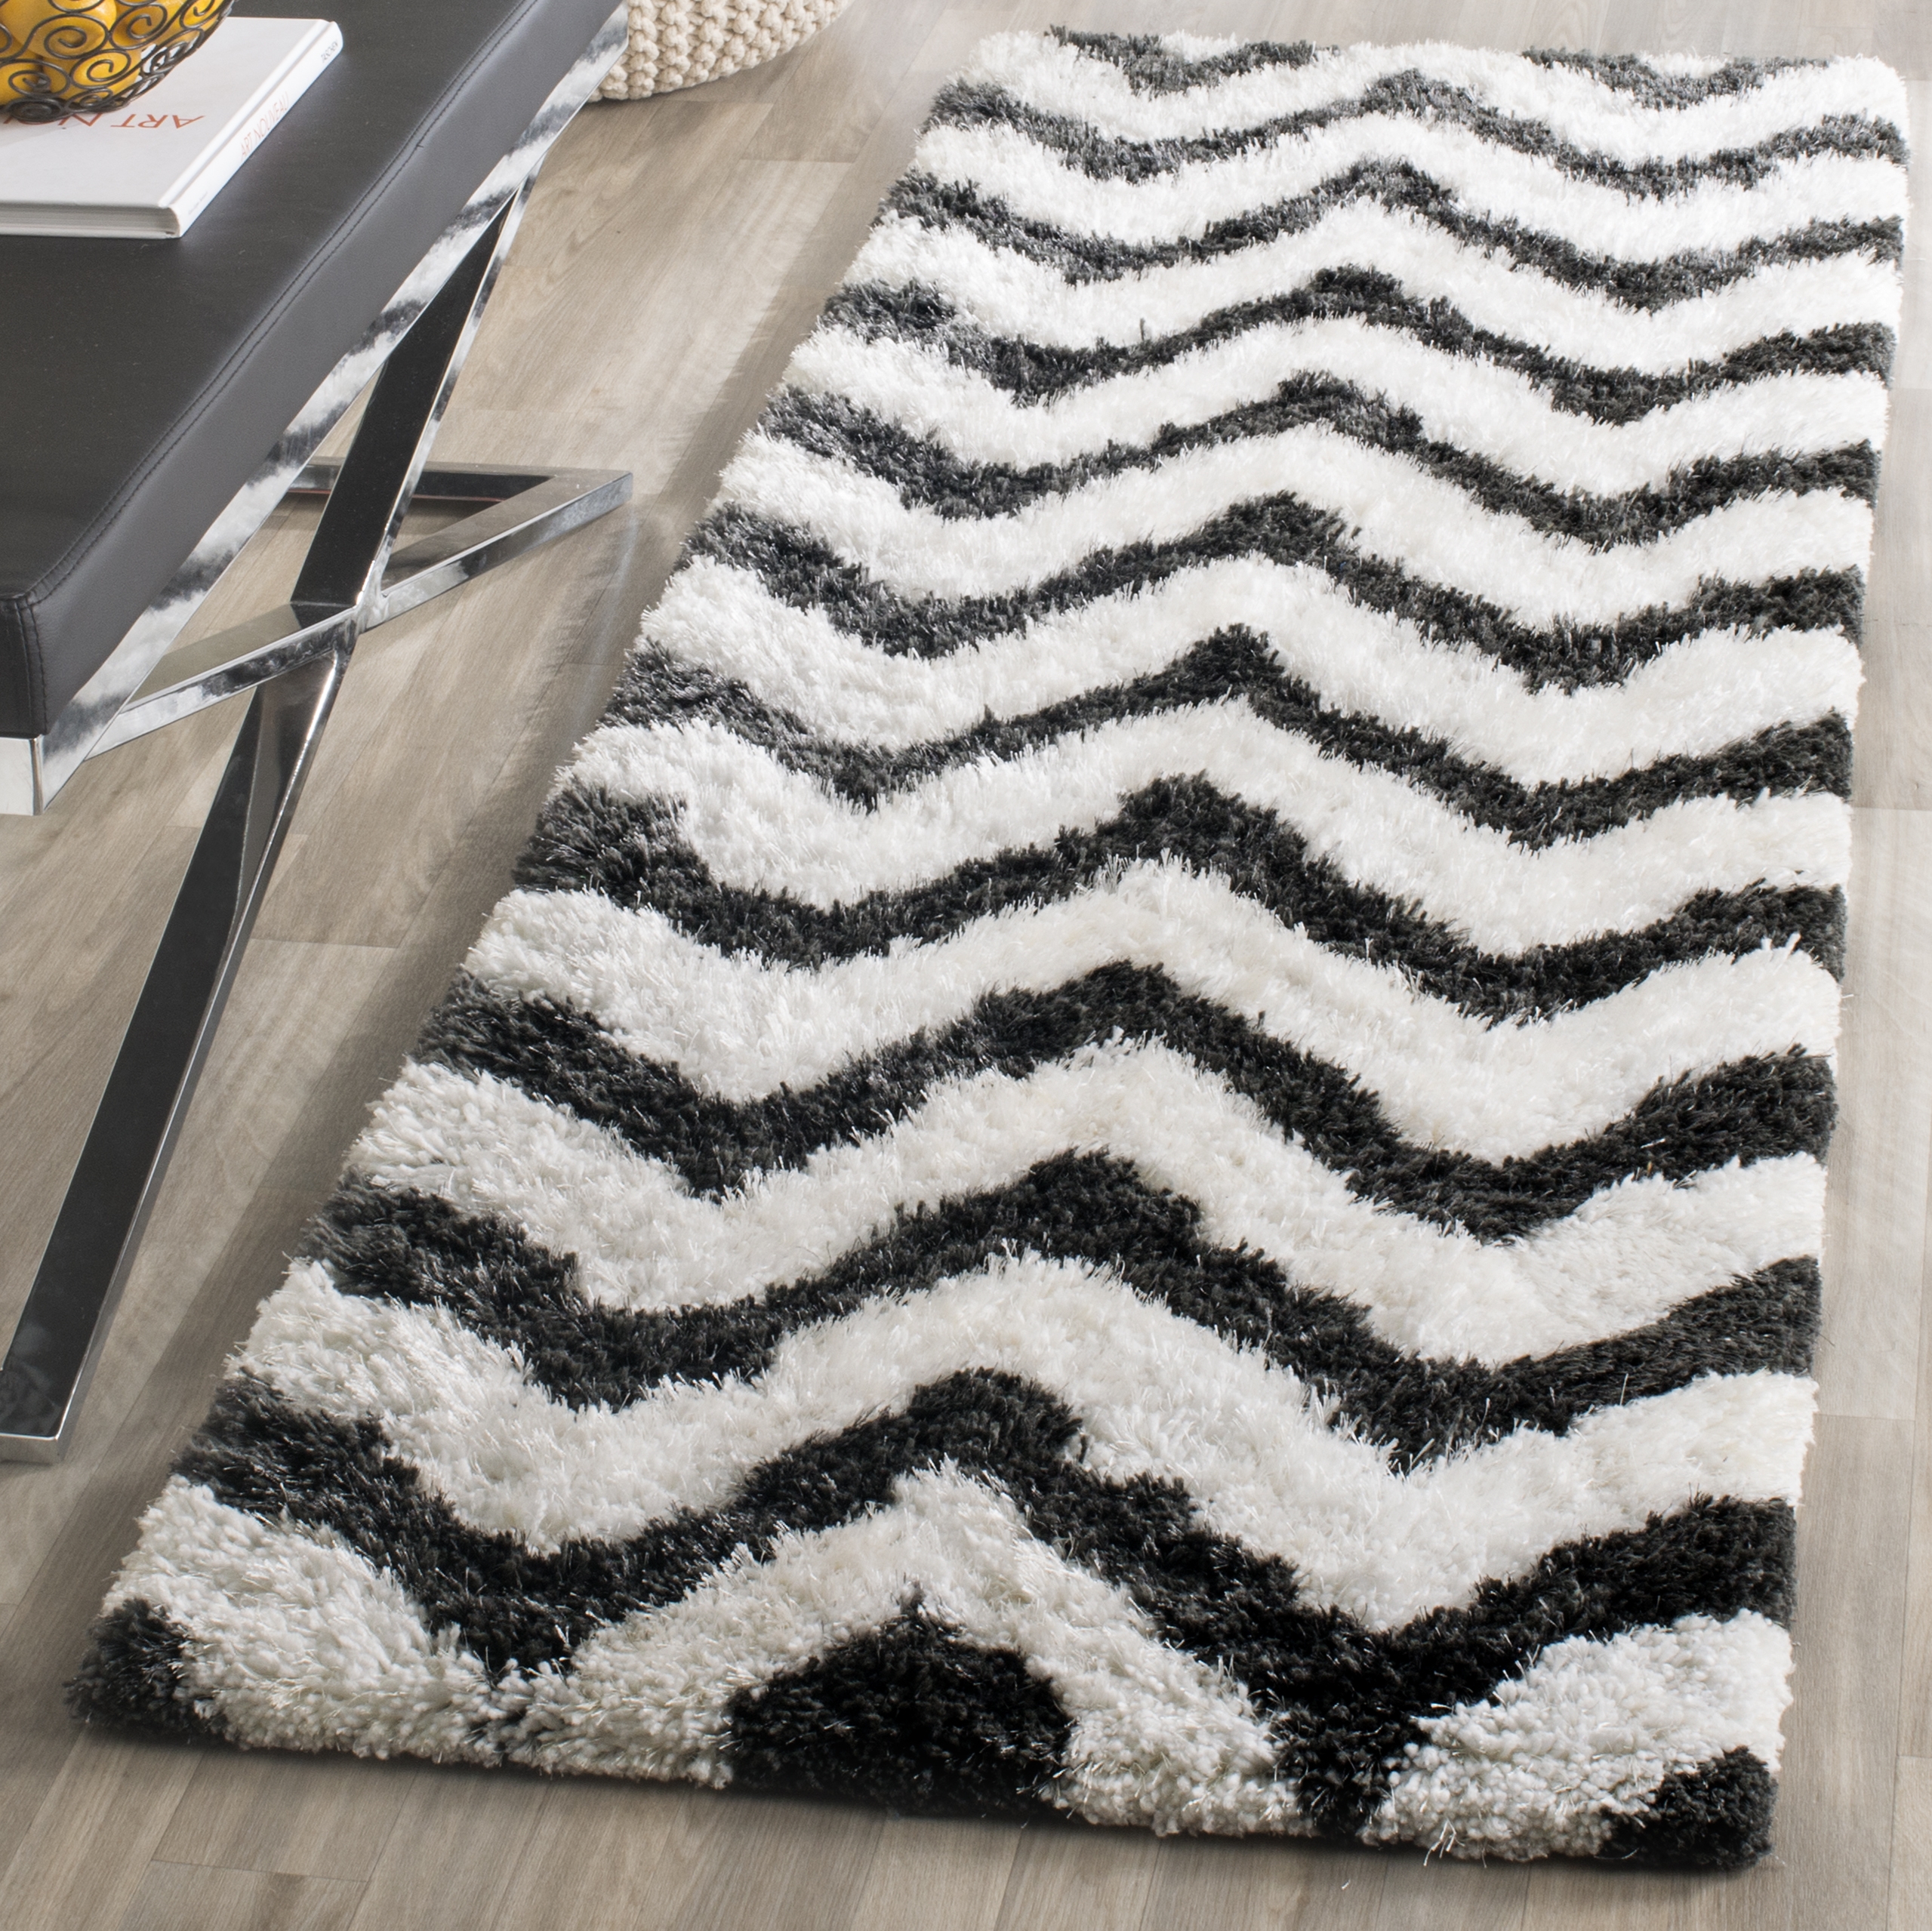 Arlo Home Hand Tufted Area Rug, BSG320D, Graphite/Ivory,  2' 3" X 7' - Image 1